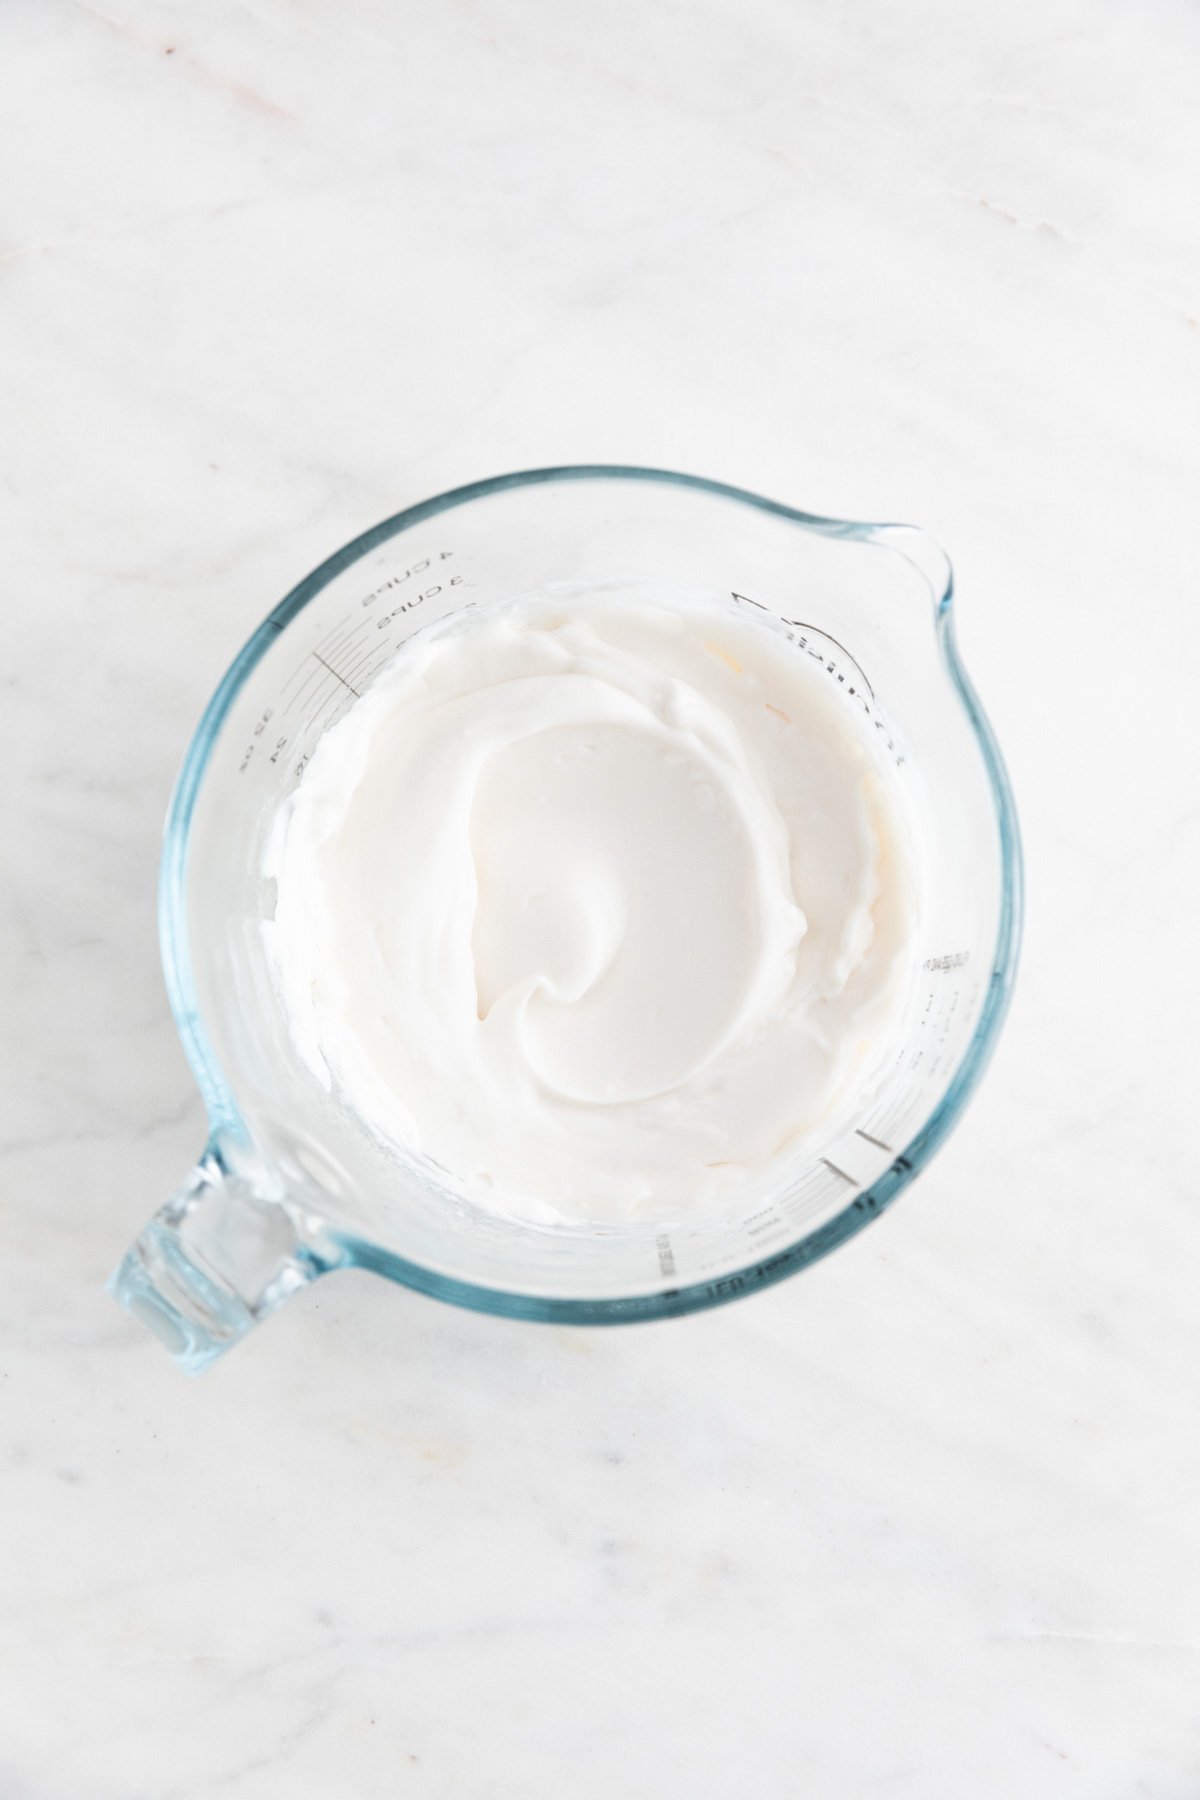 The vegan mayonnaise in a glass measuring cup.